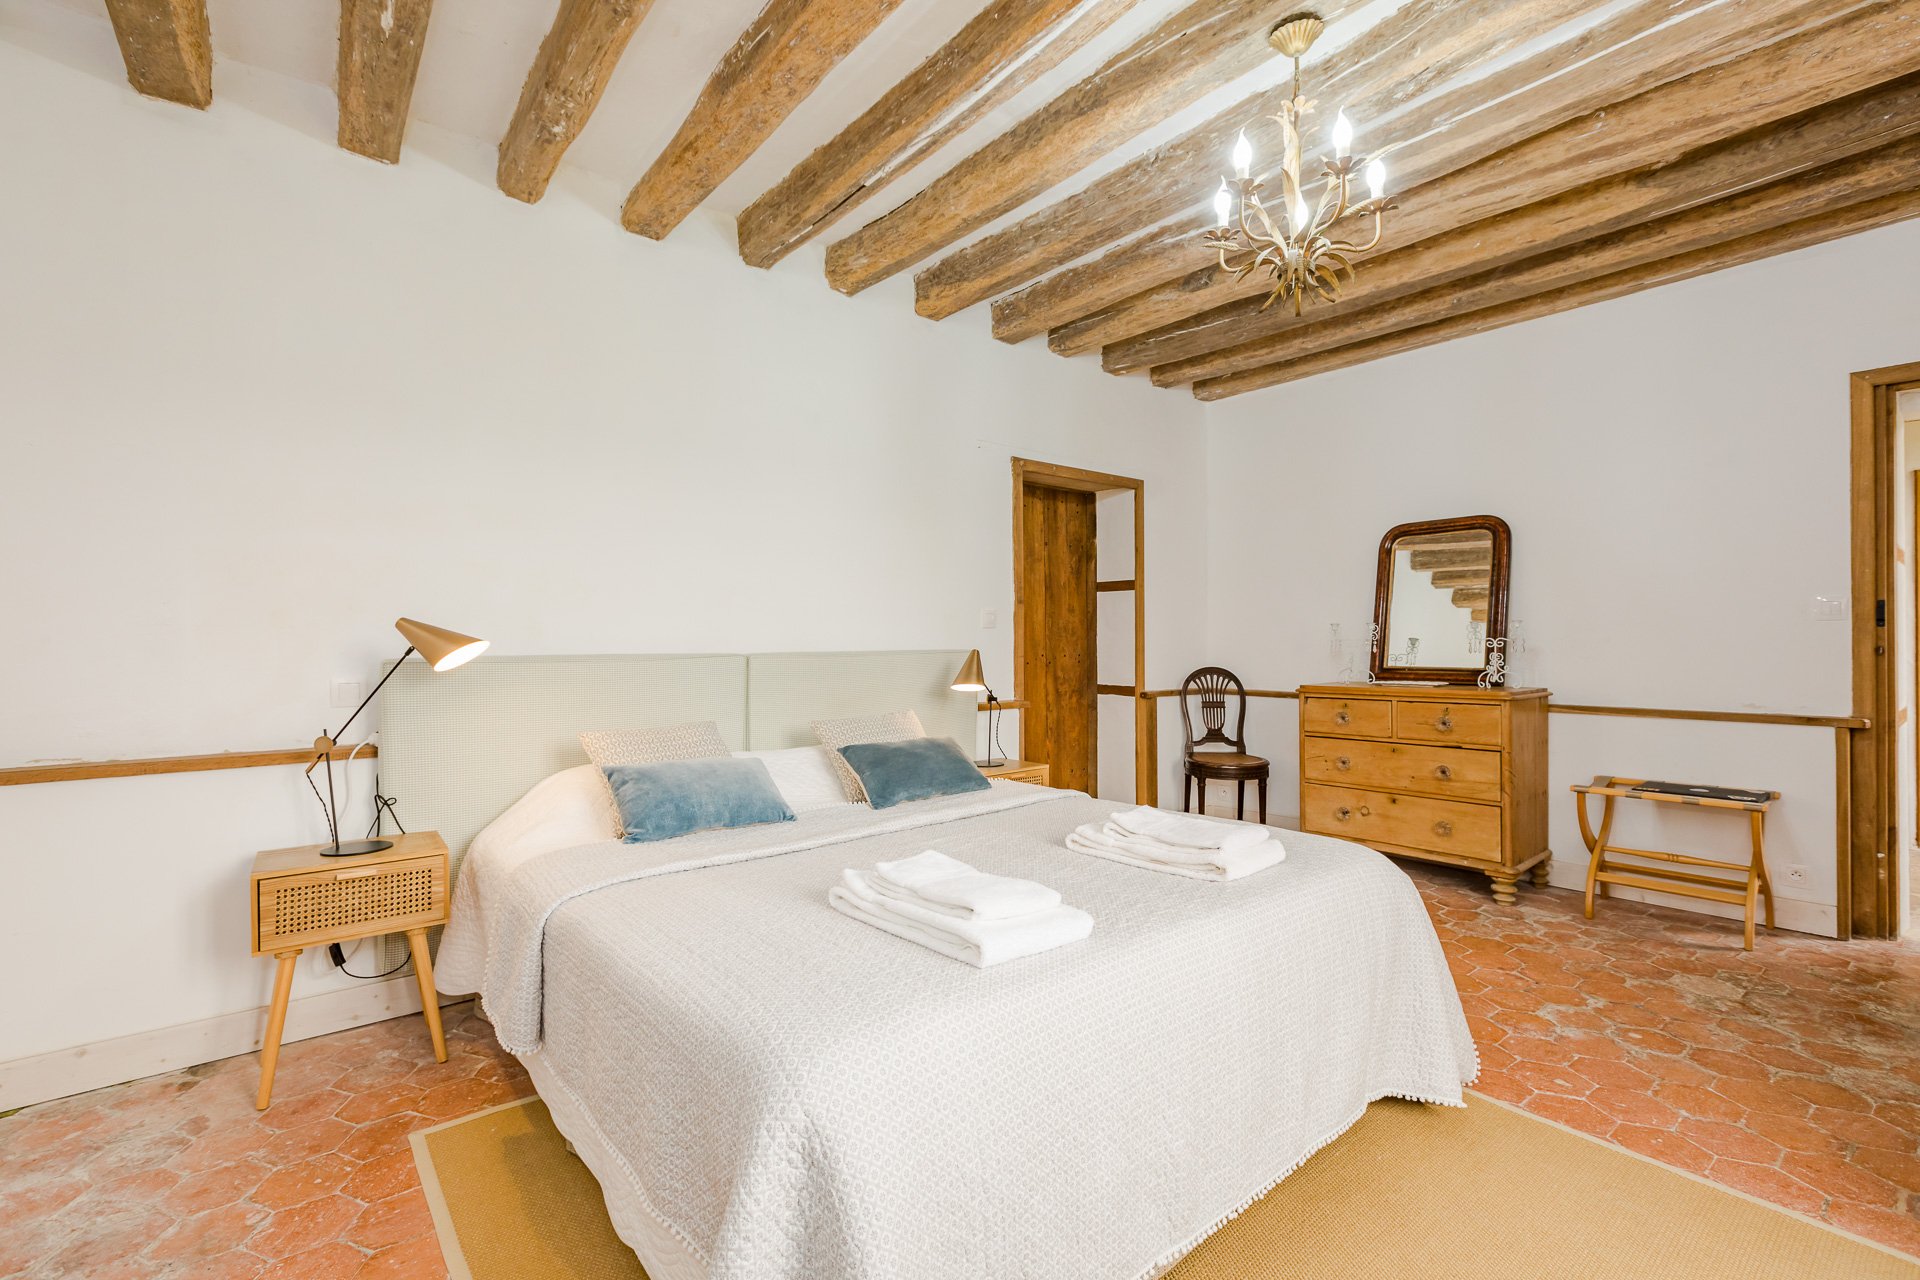 A cozy en suite bedroom with beamed ceiling in the farmhouse on the grounds of Chateau de Courtomer.